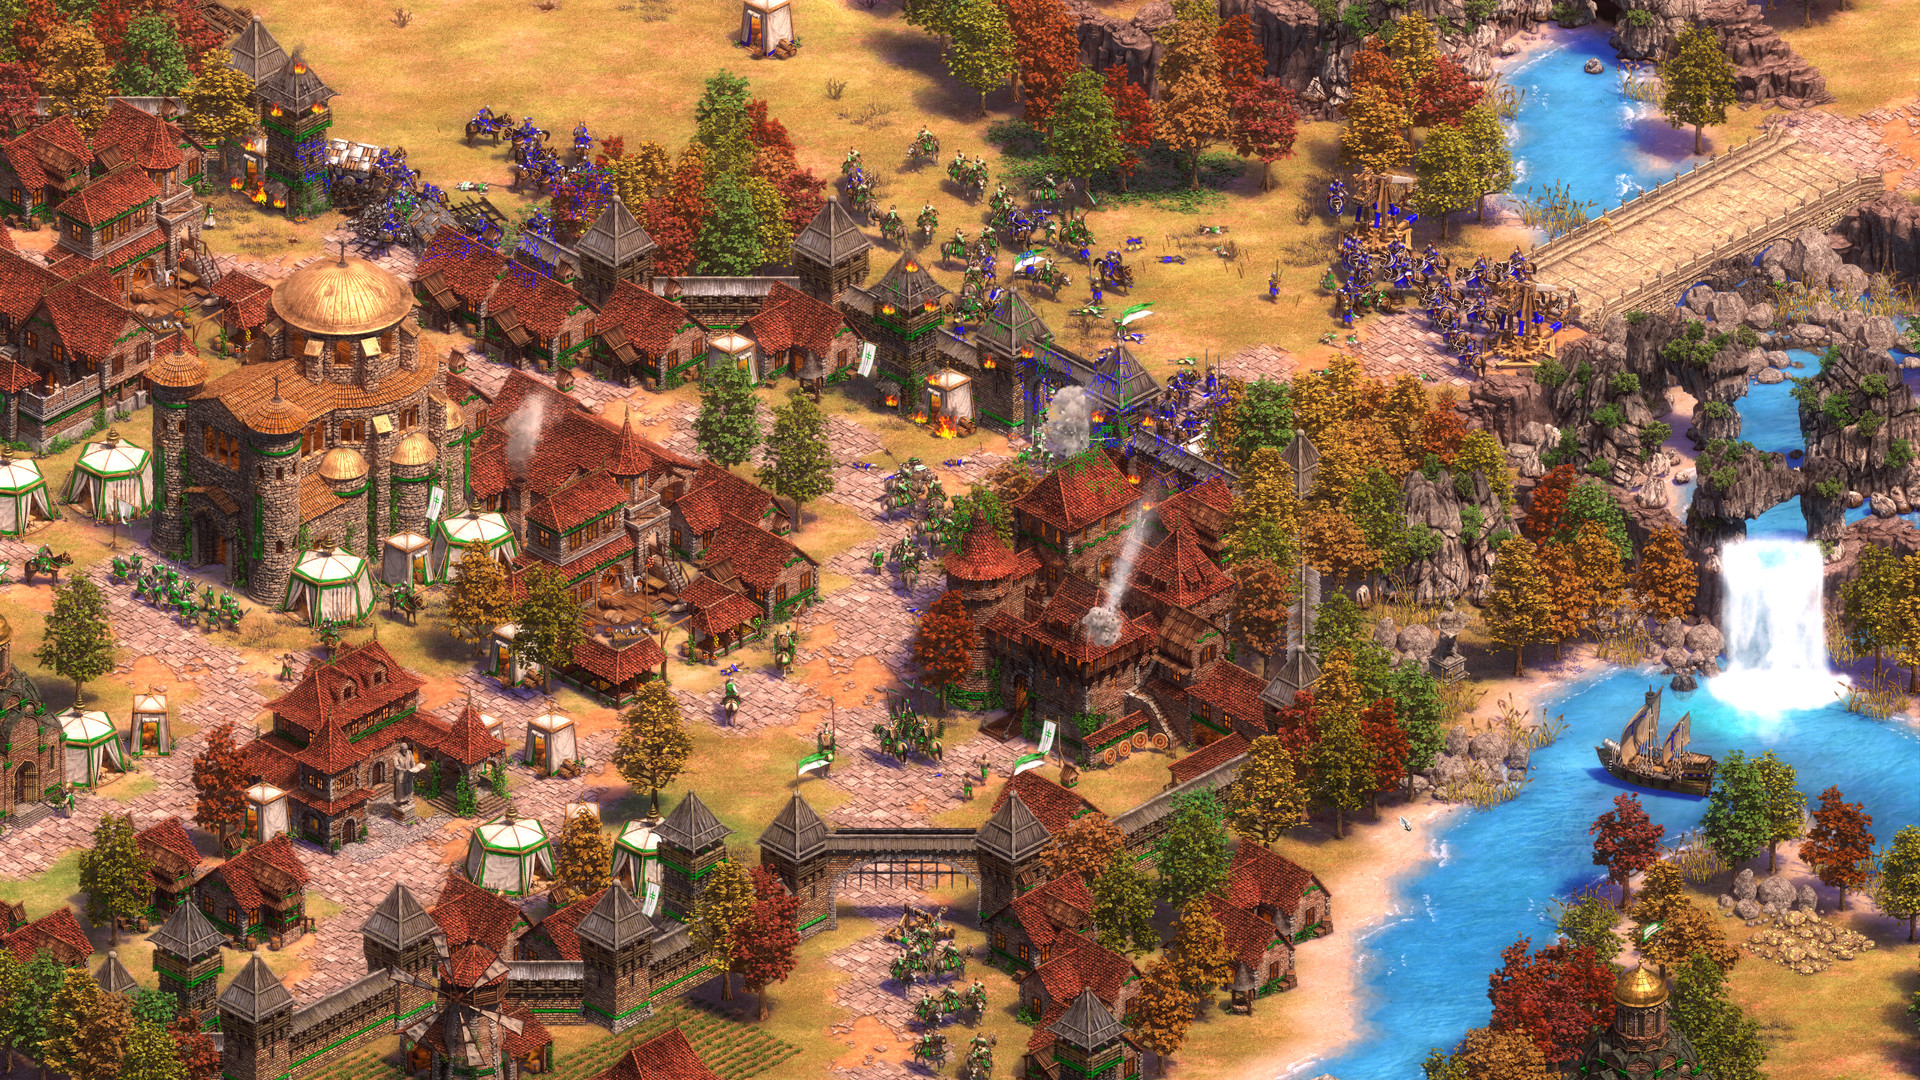 Age of empires 2 mac torrent free